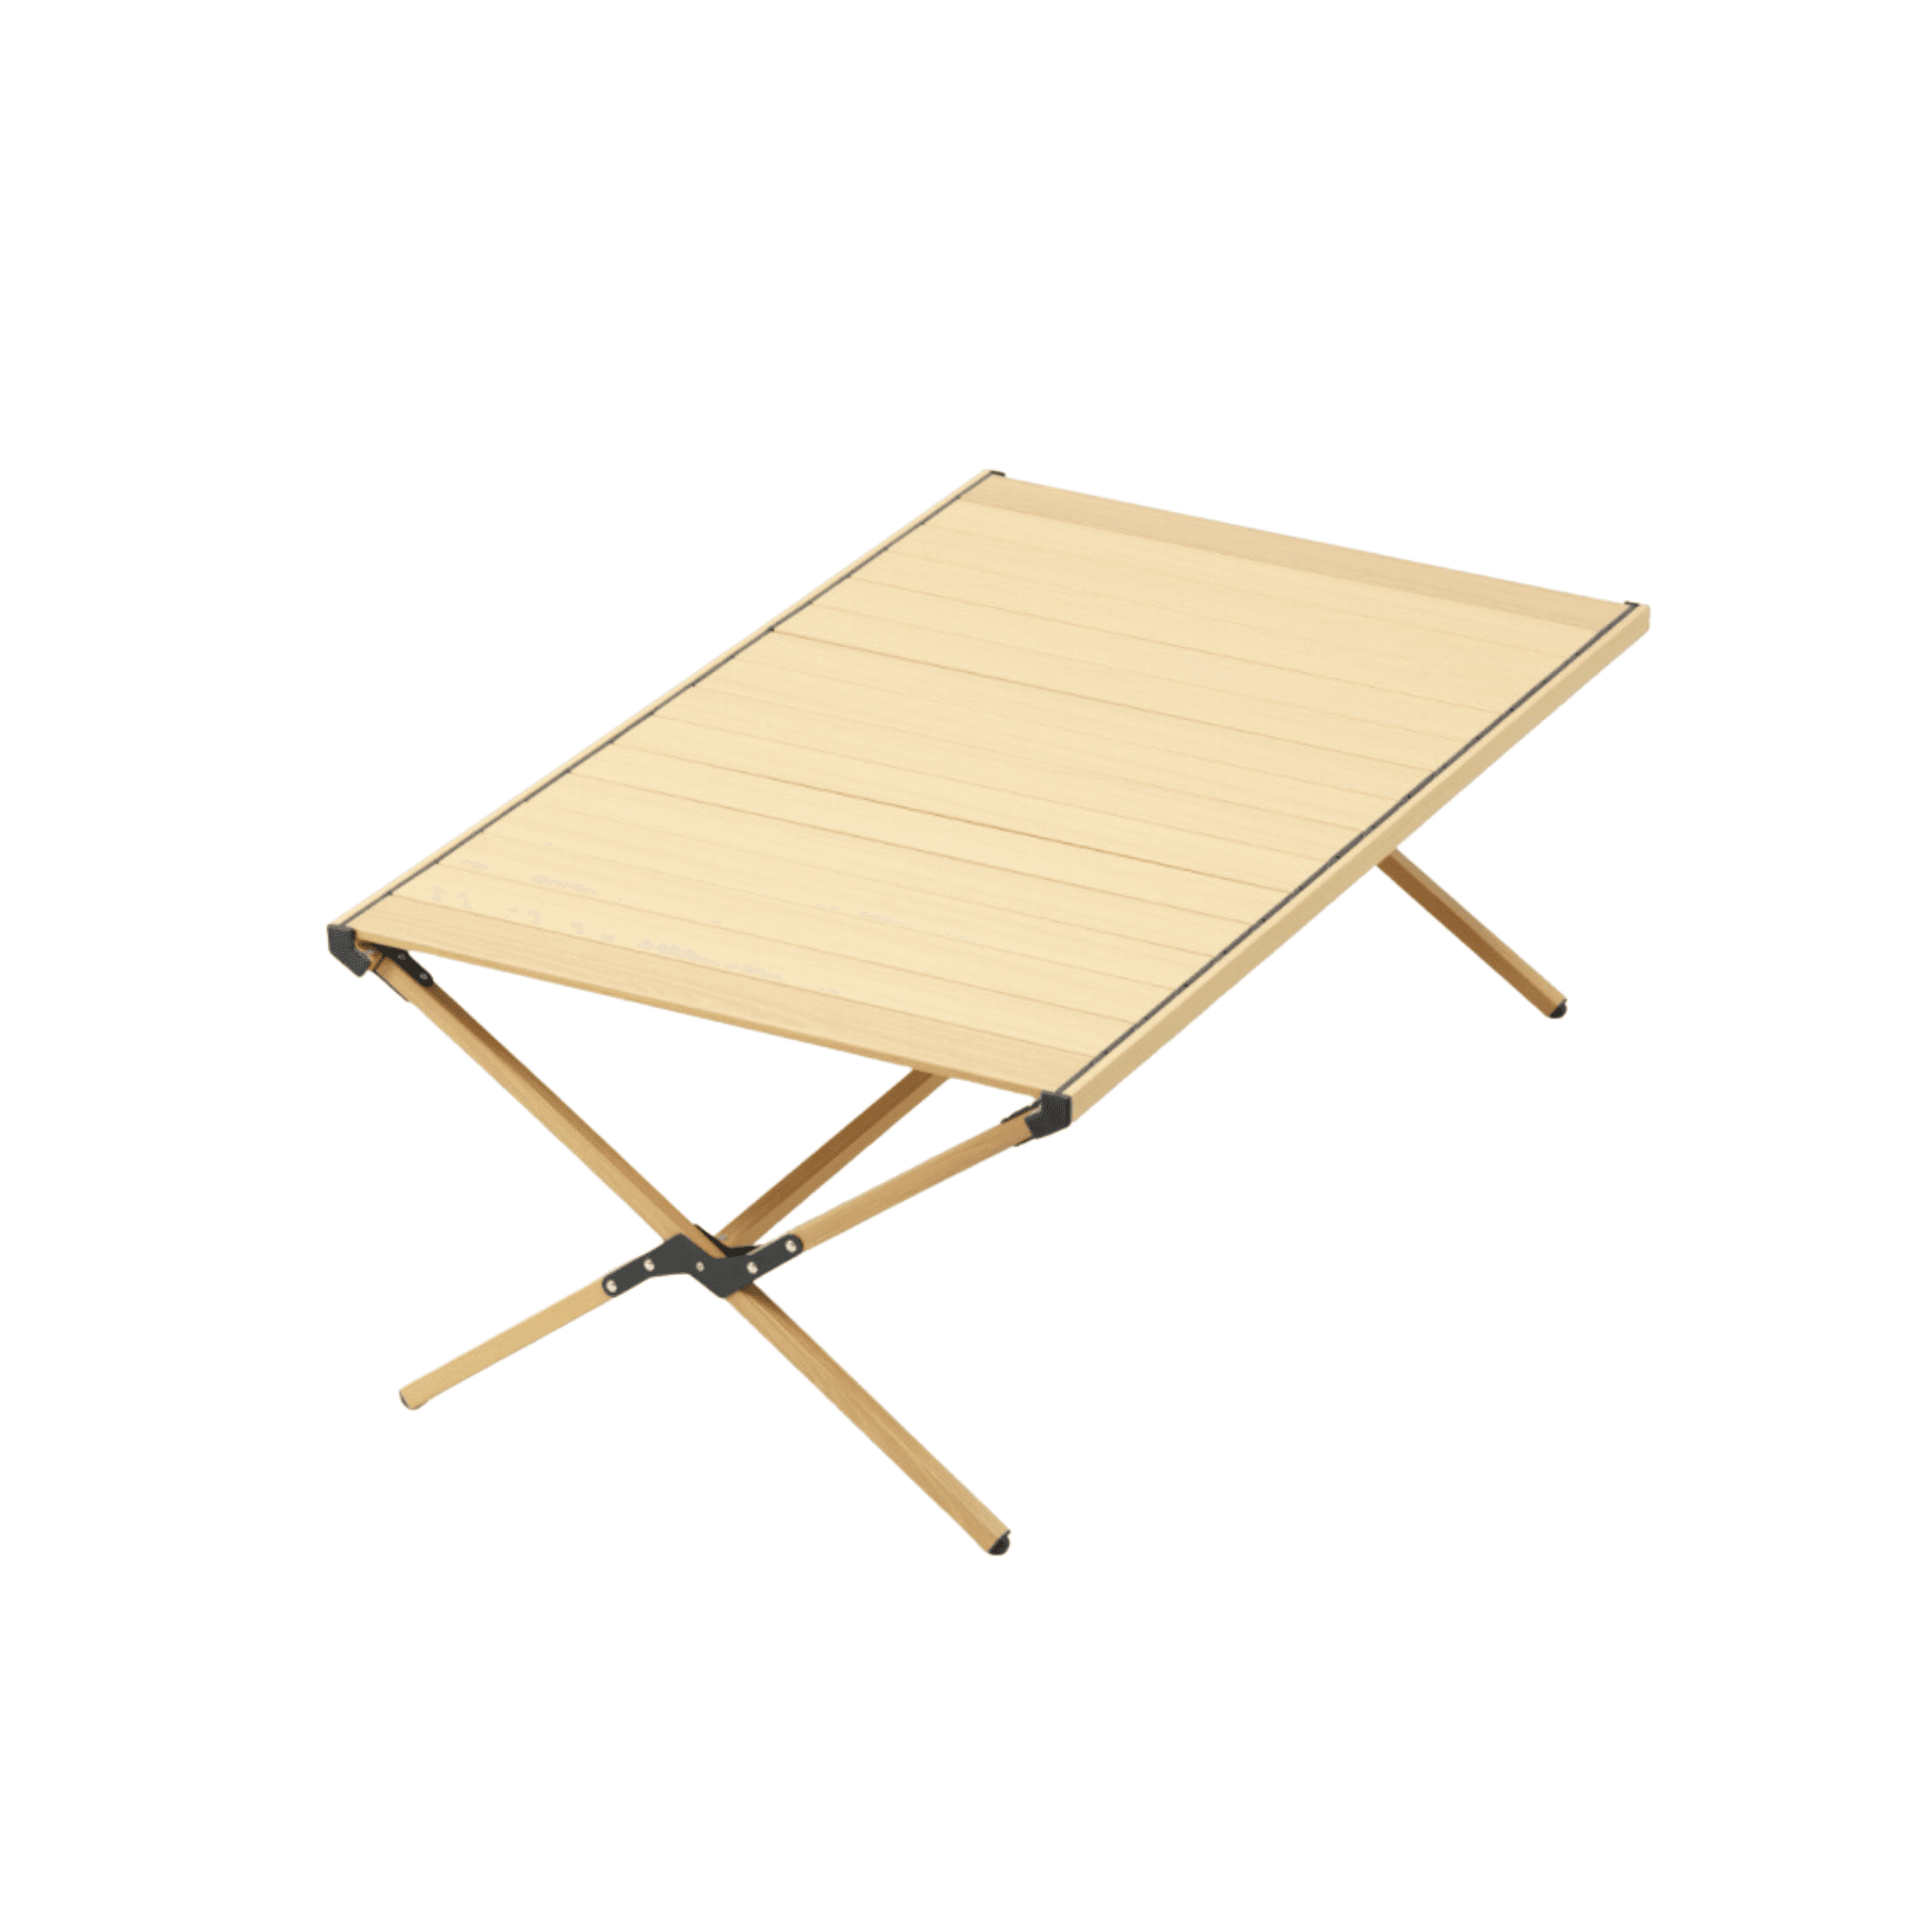 Folding camping table, size 90x60x42 cm